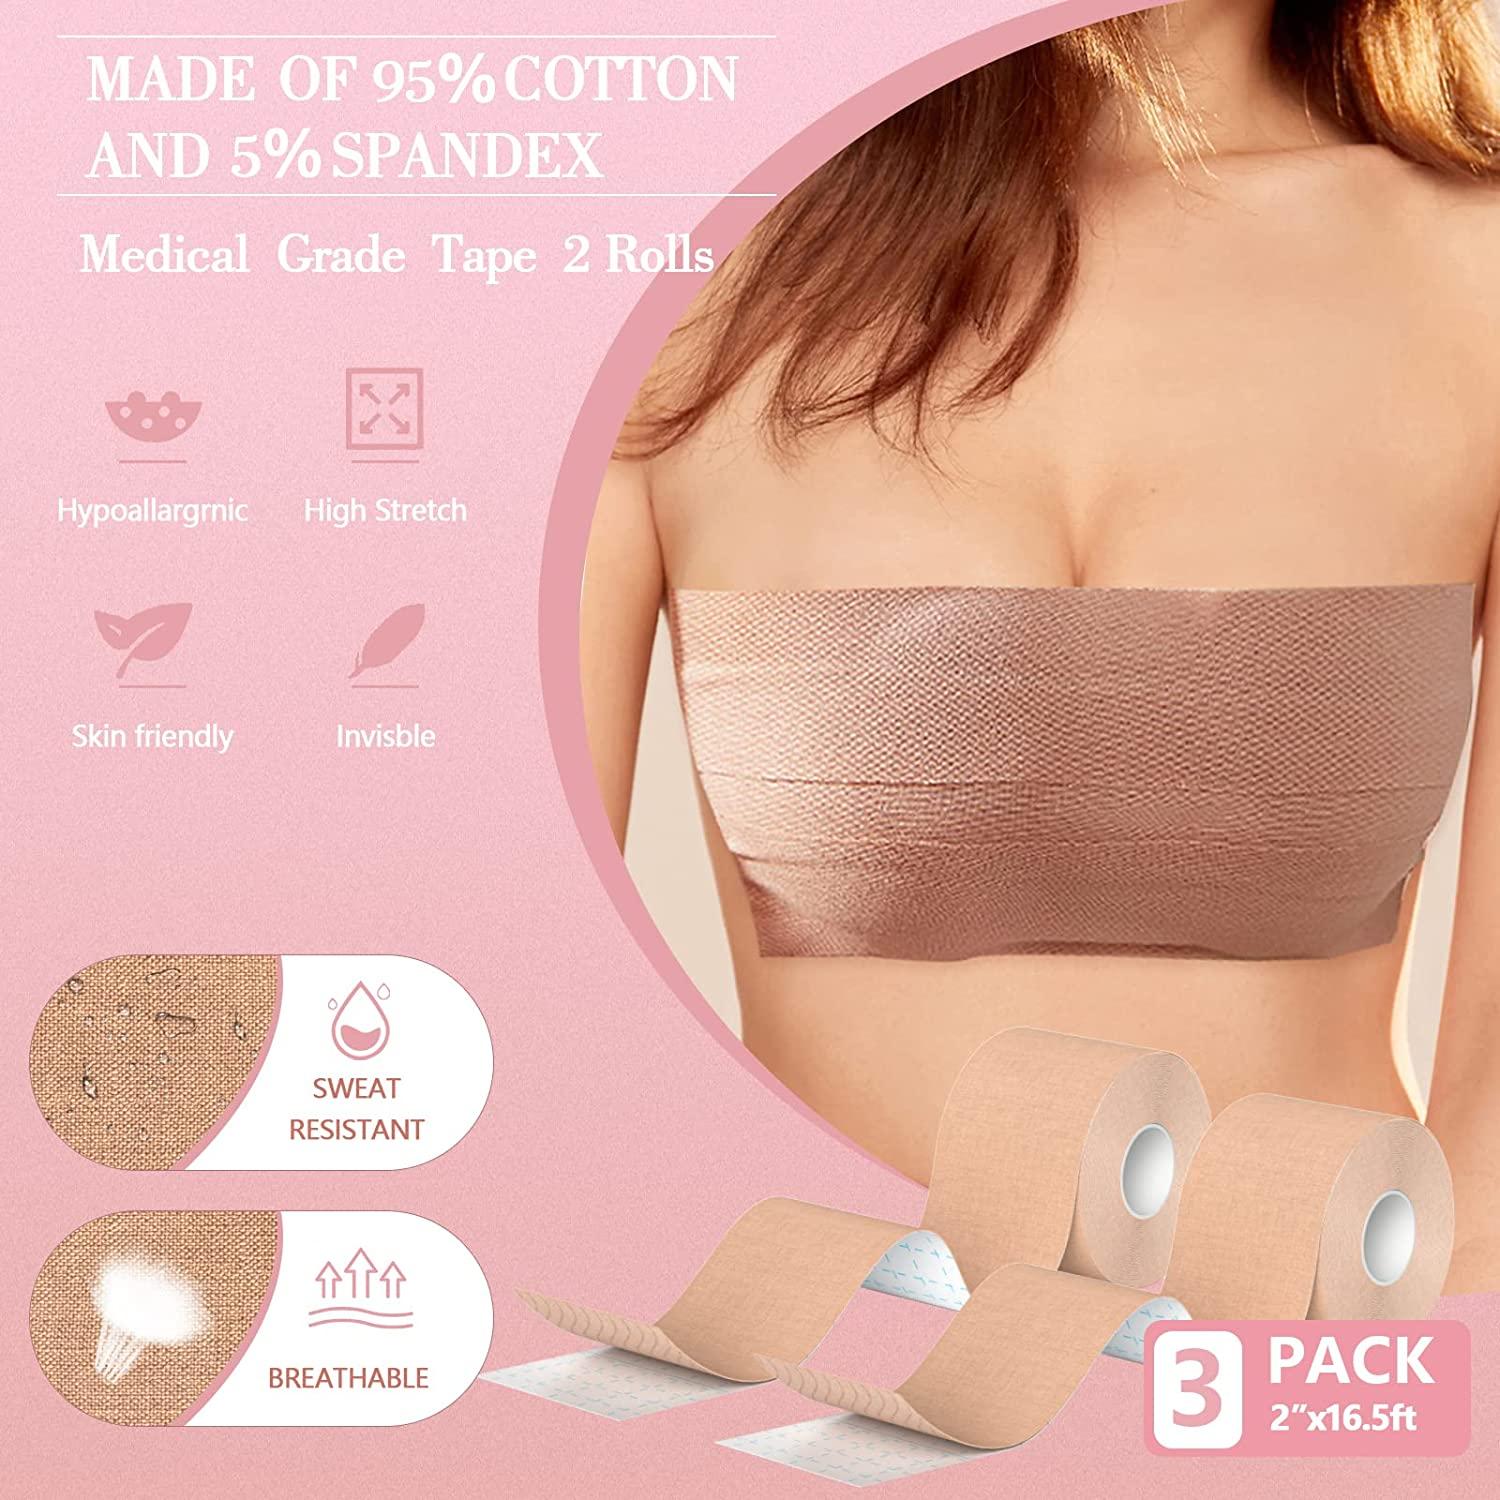 Joefnel Boob Tape, Breast Lift Tape for Contour Lift & Fashion, Bra  Alternative of Breasts, Body Tape for Lift & Push up in All Clothing  Fabric Dress Types